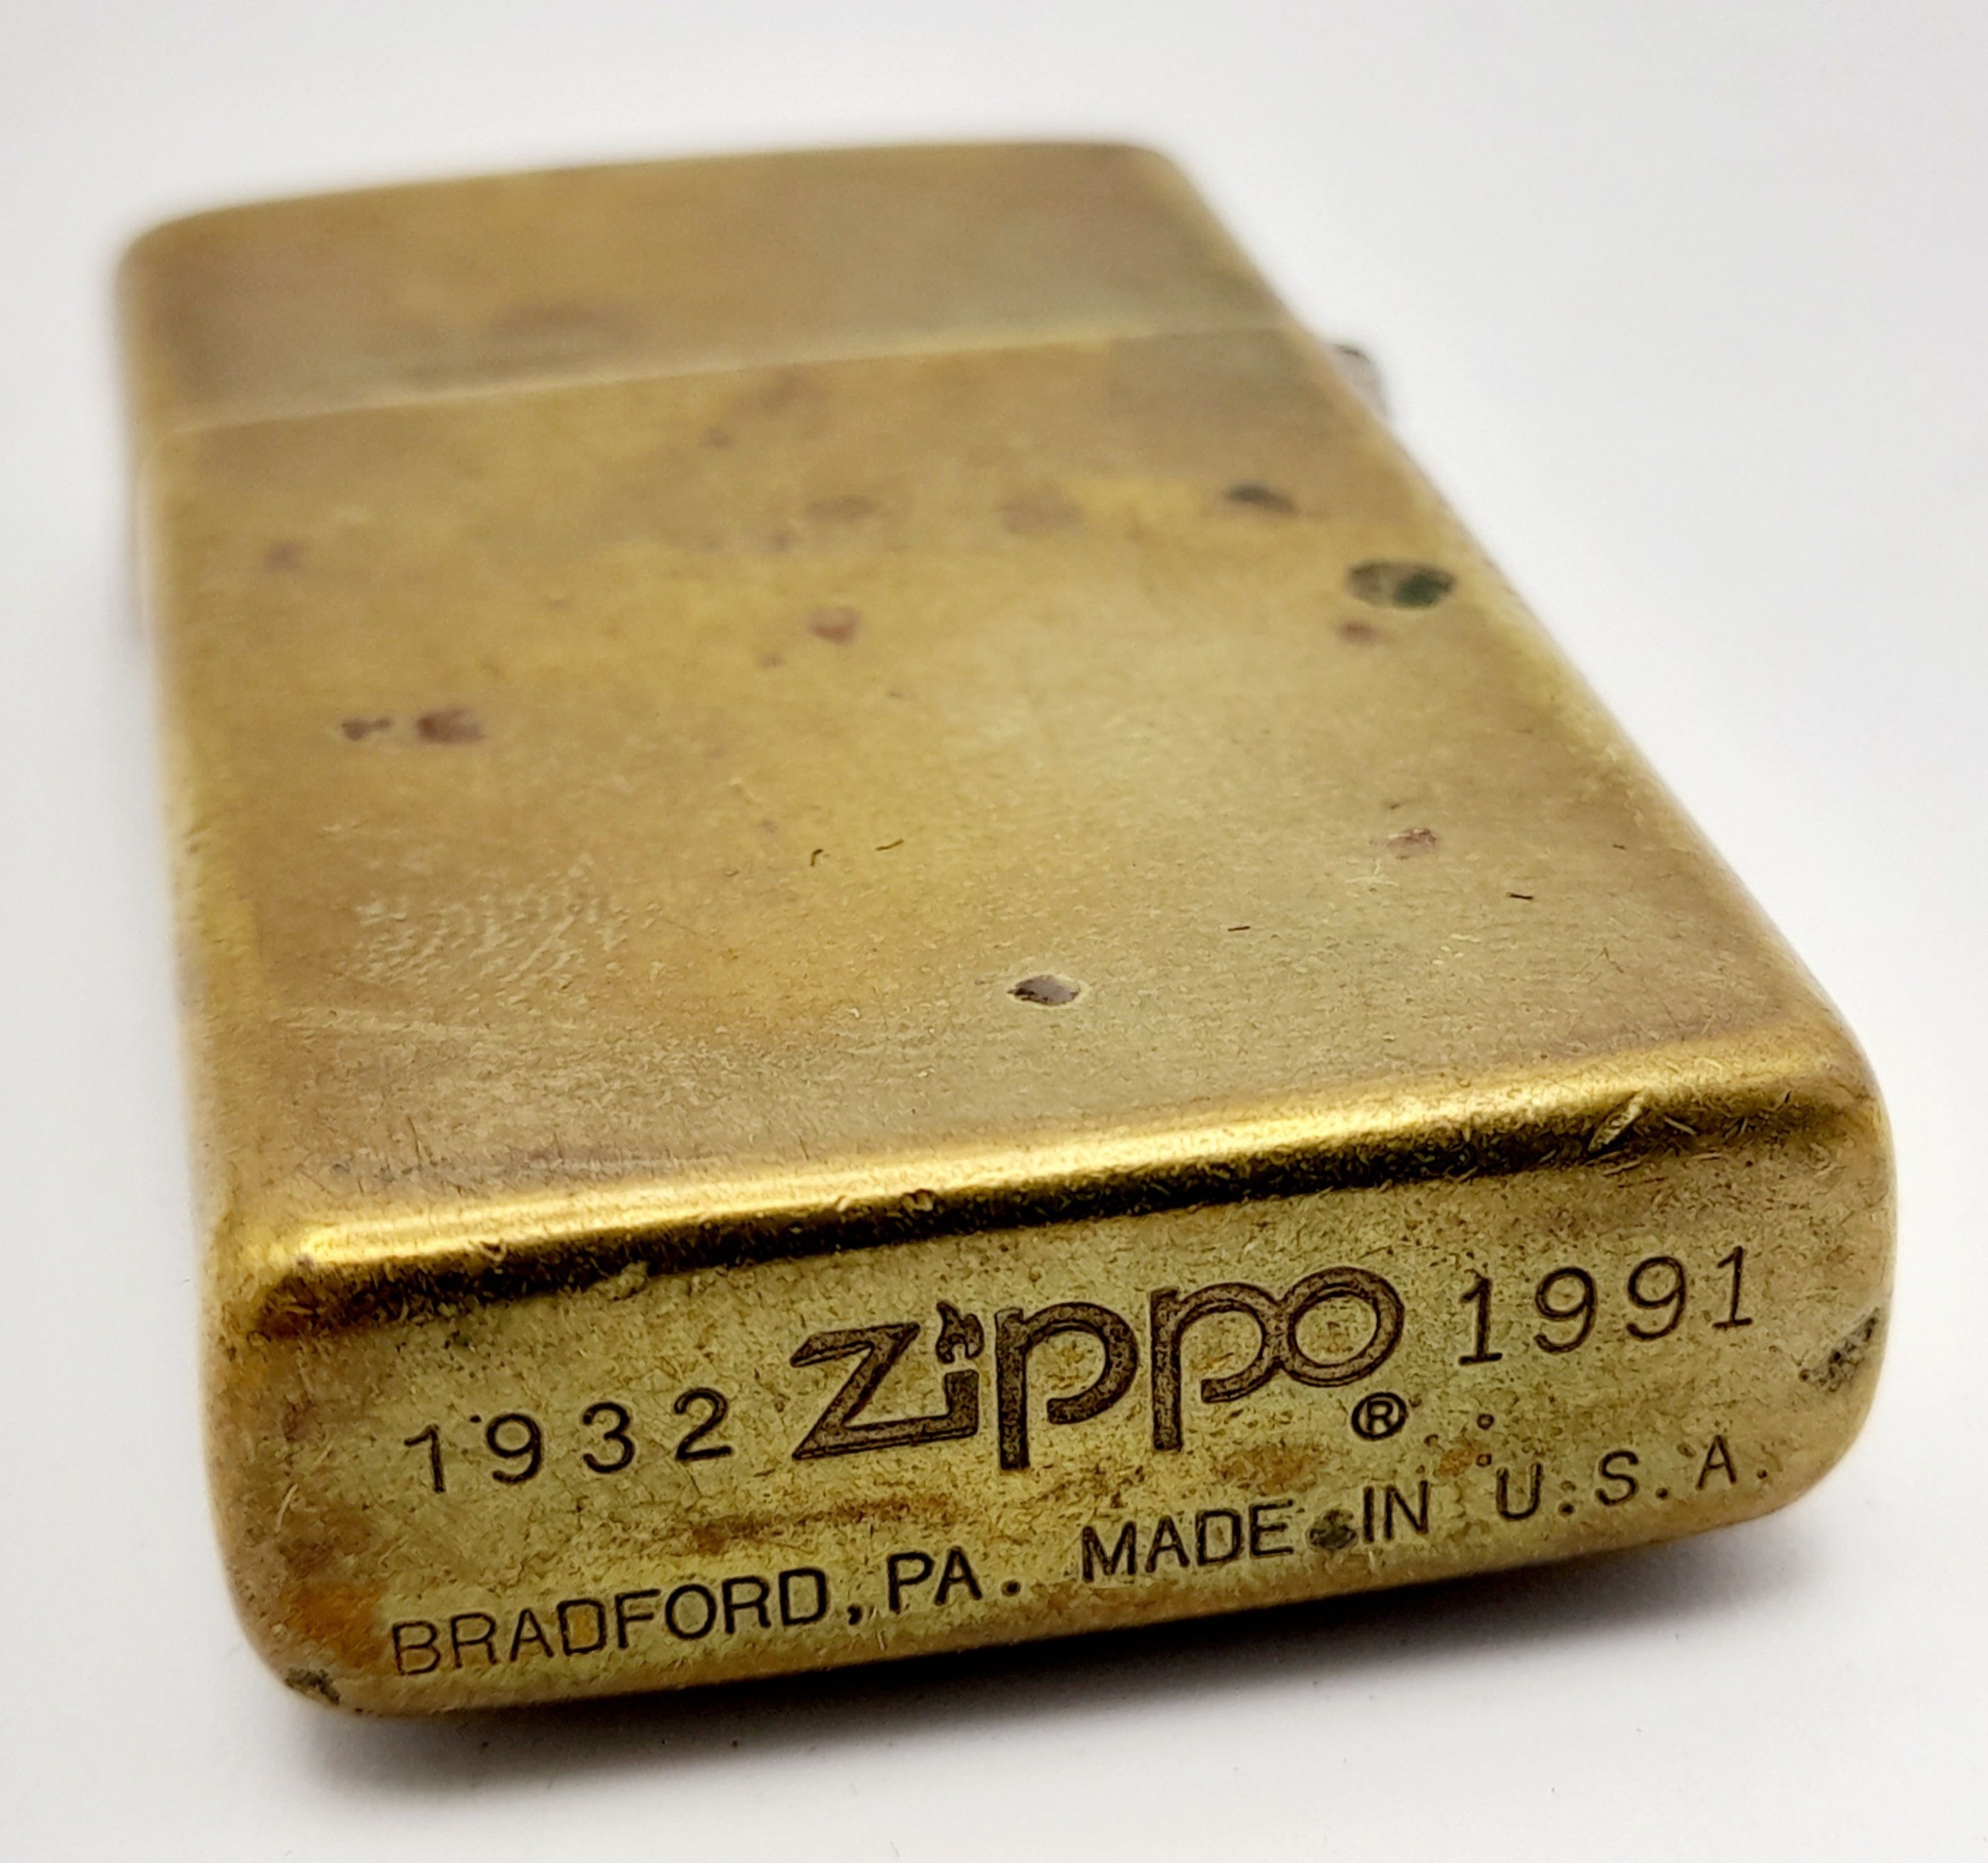 A Vintage (1991) Brass Zippo Lighter with Service Kit Tools. 1932-1991 Model, Made USA. UK - Image 4 of 4